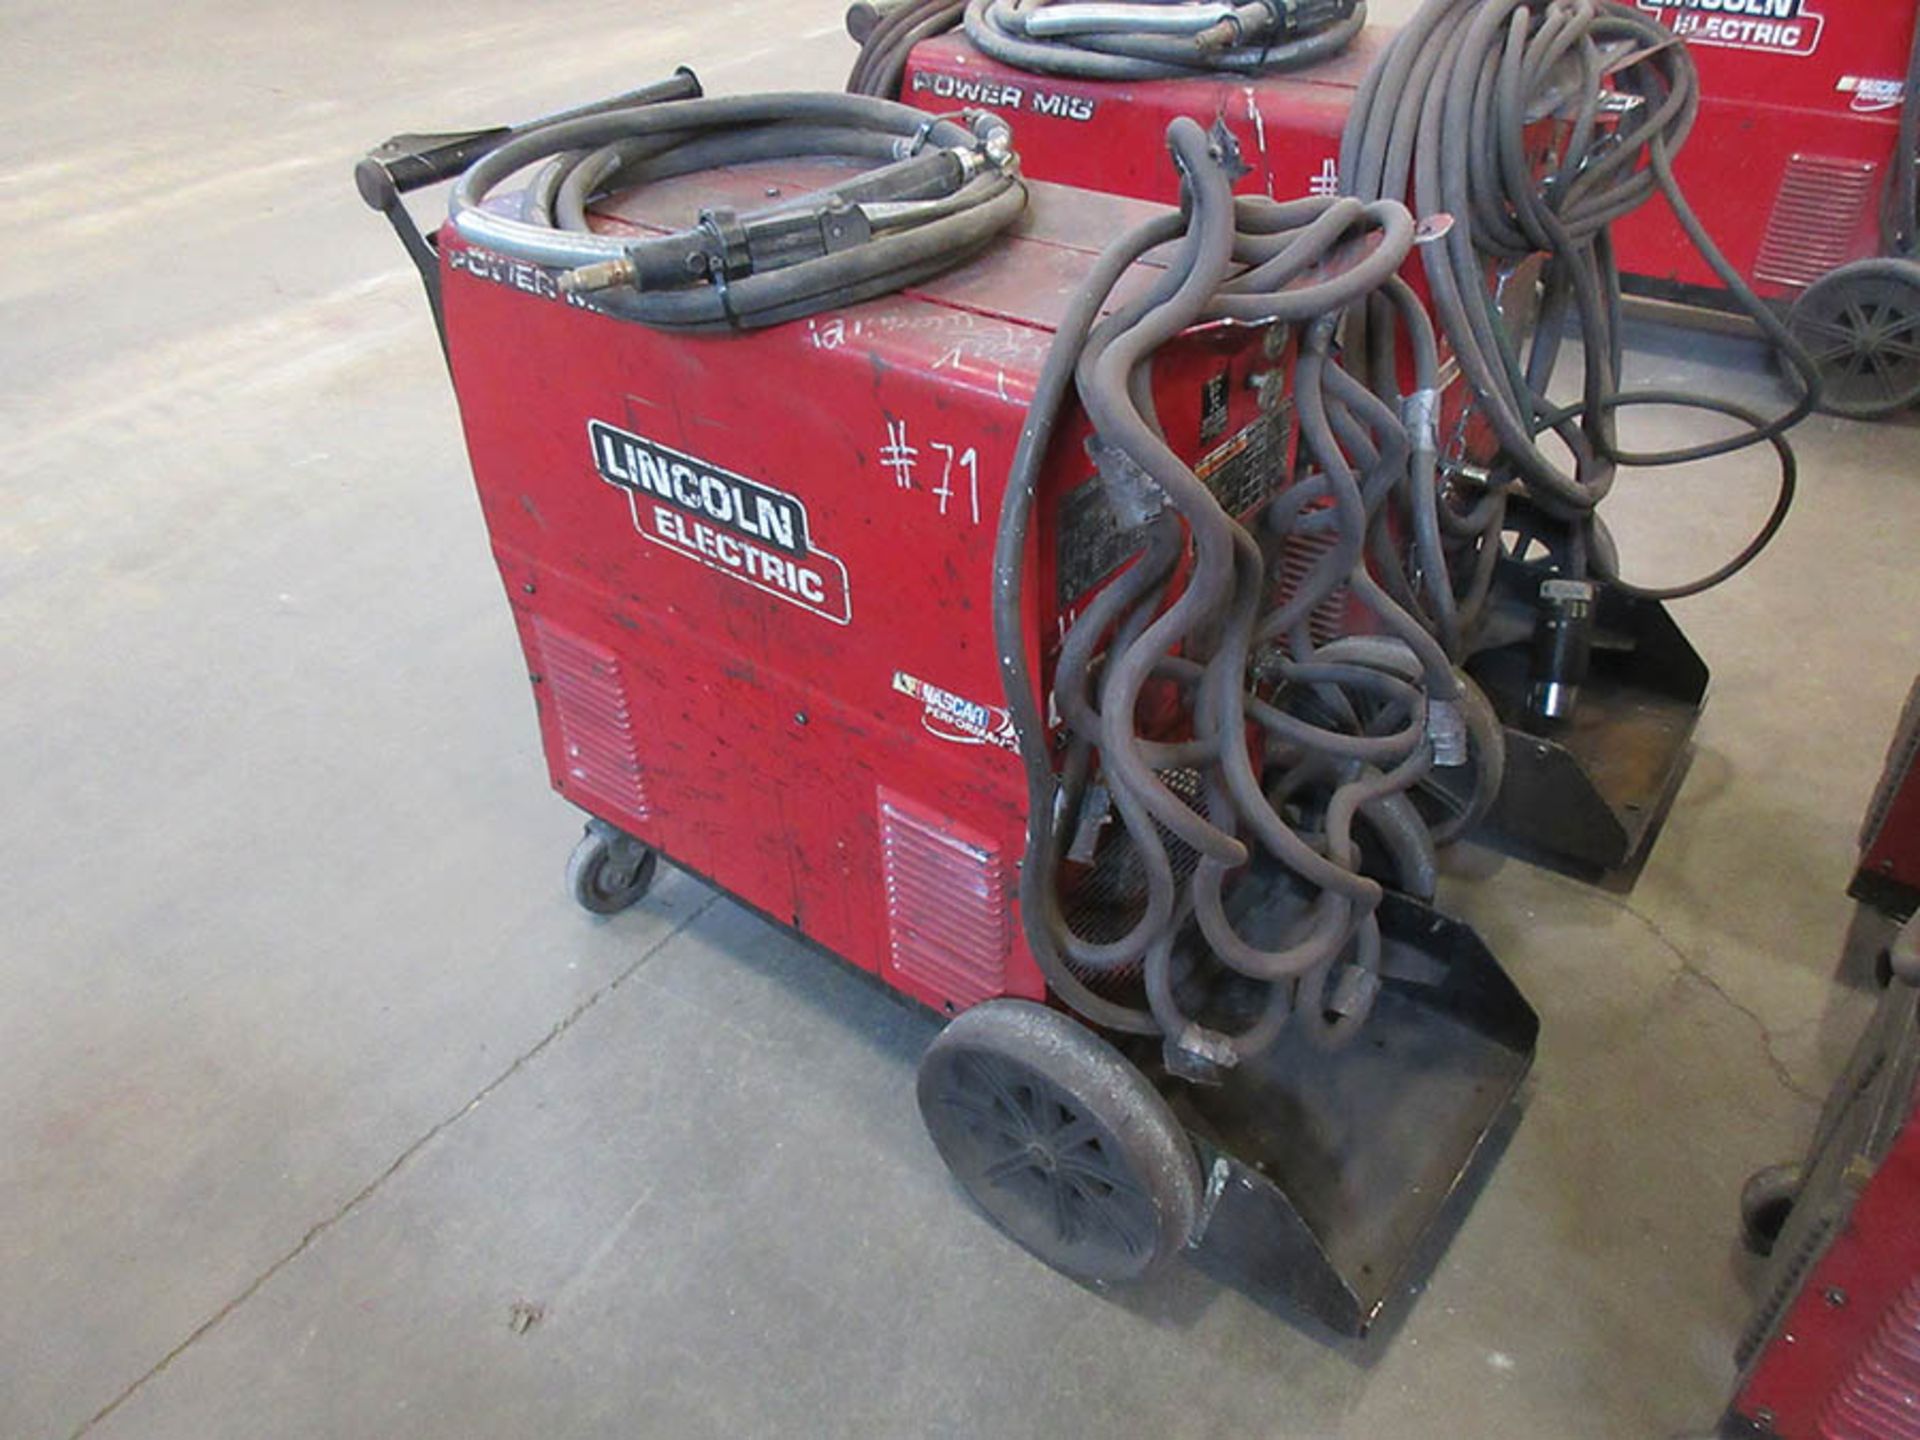 LINCOLN ELECTRIC 350MP POWER MIG WELDER WITH MAGNUM PRO MIG GUN, #71 - Image 2 of 3